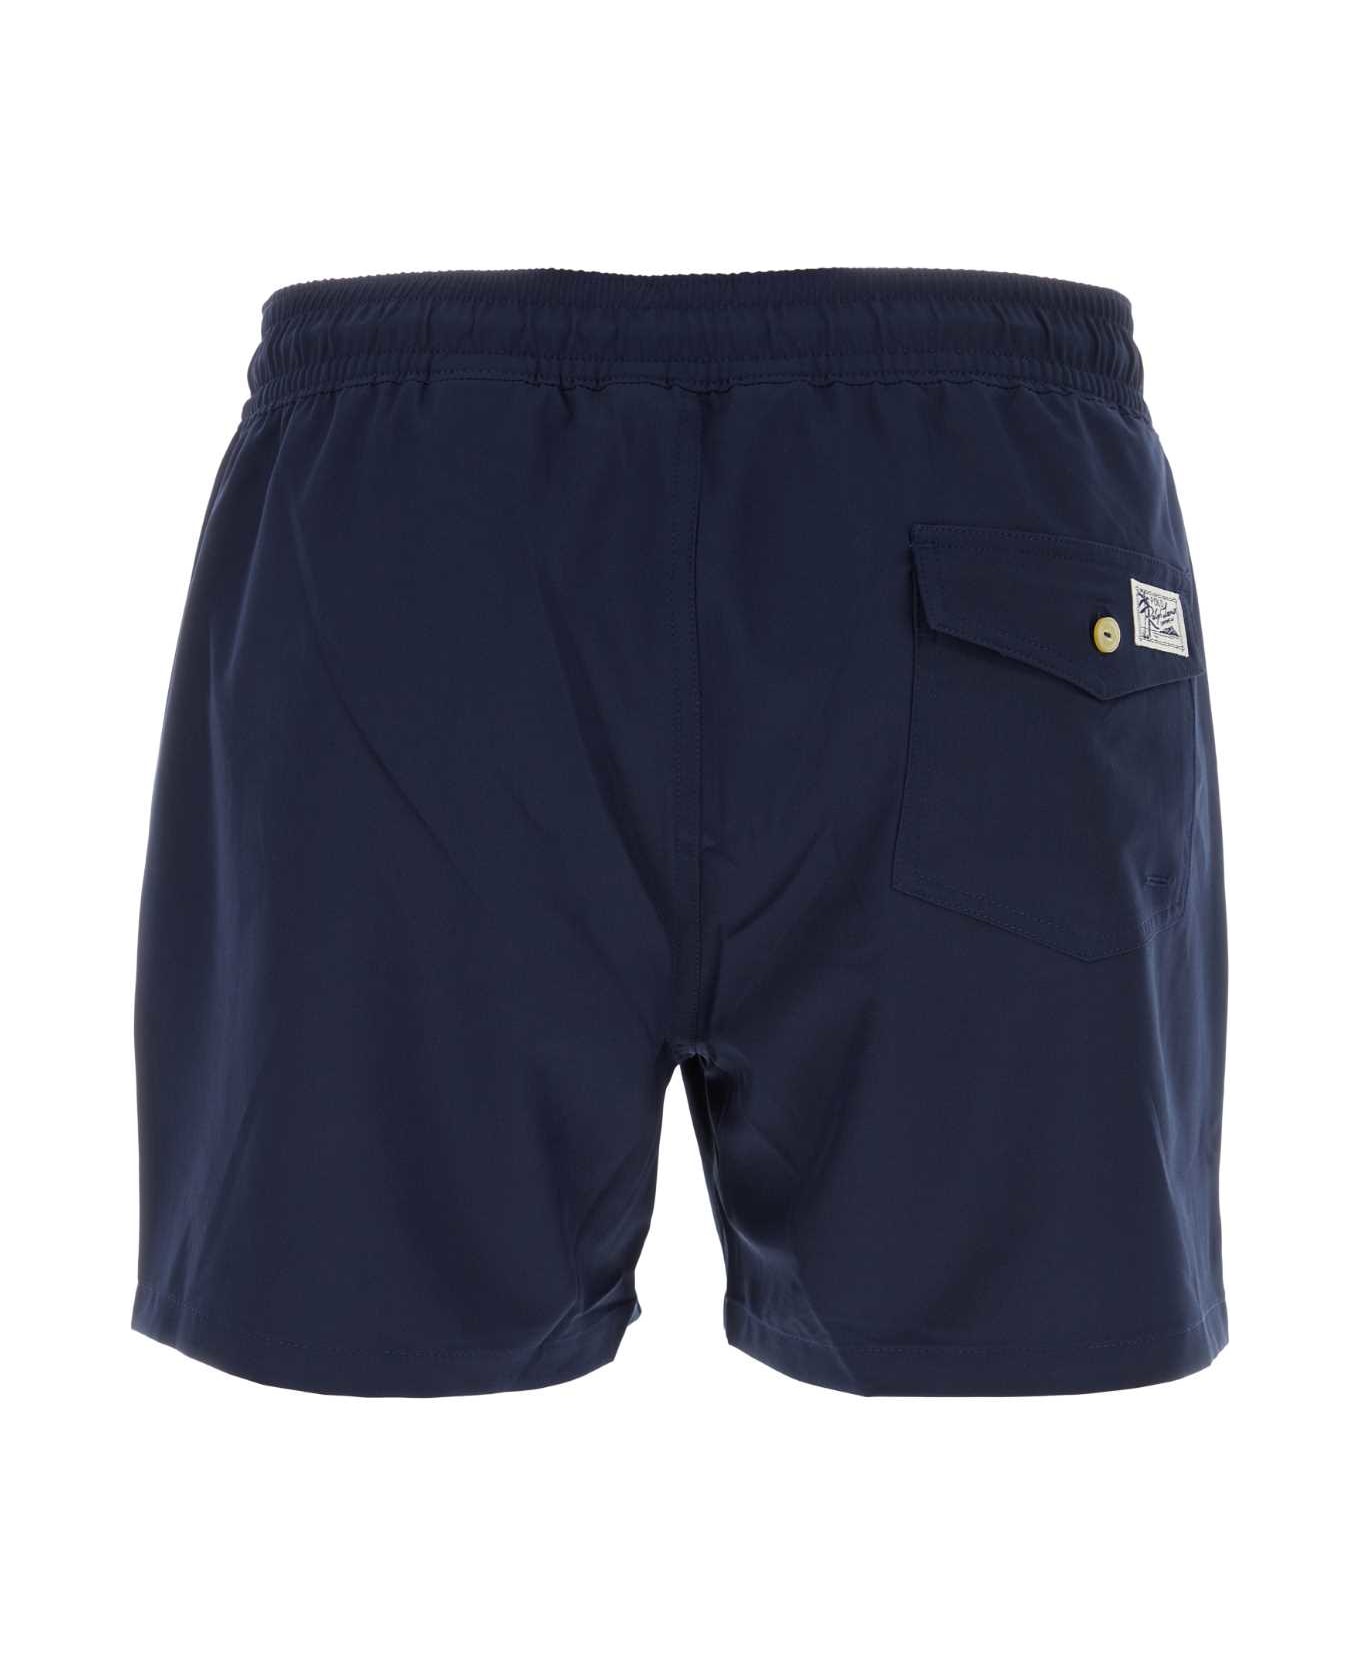 Polo Ralph Lauren Navy Blue Stretch Polyester Swimming Shorts - 004